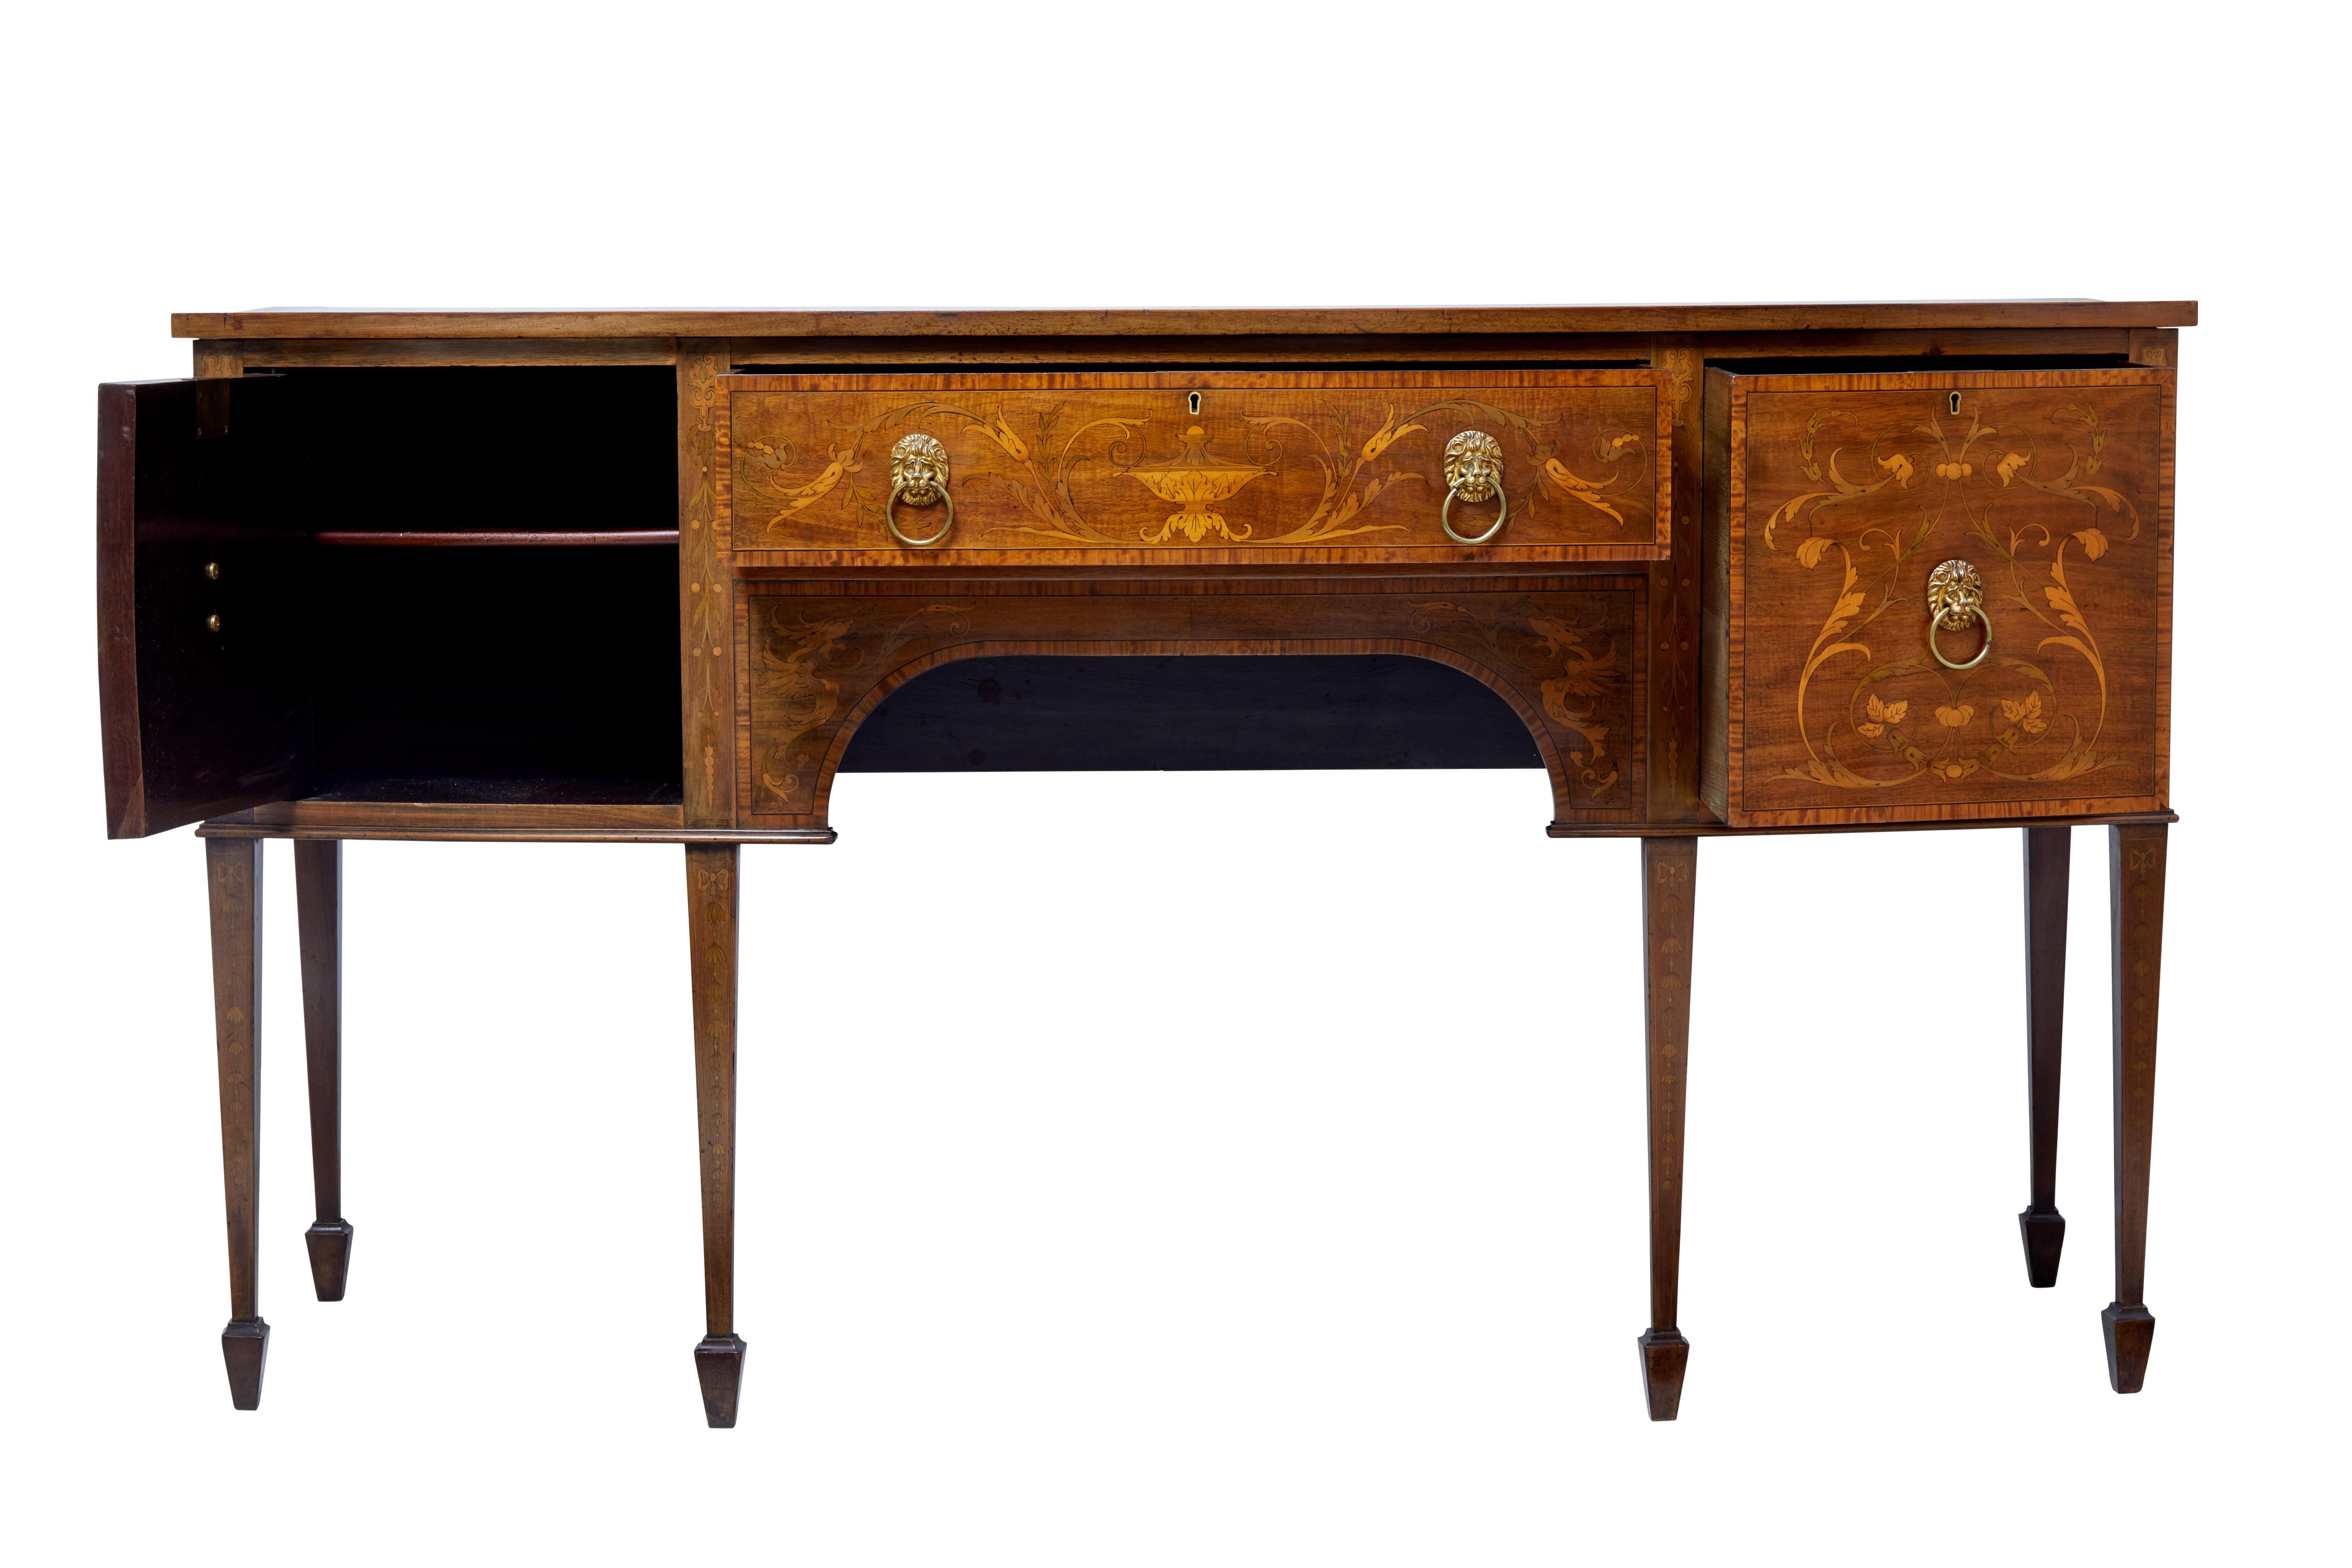 Good quality George III inlaid sideboard, circa 1810.

Doors and legs beautifully inlaid, crossbanded and strung. With brass lion mask handles.

Single drawer to the front, flanked by a deep drawer to the right and a single door cupboard with